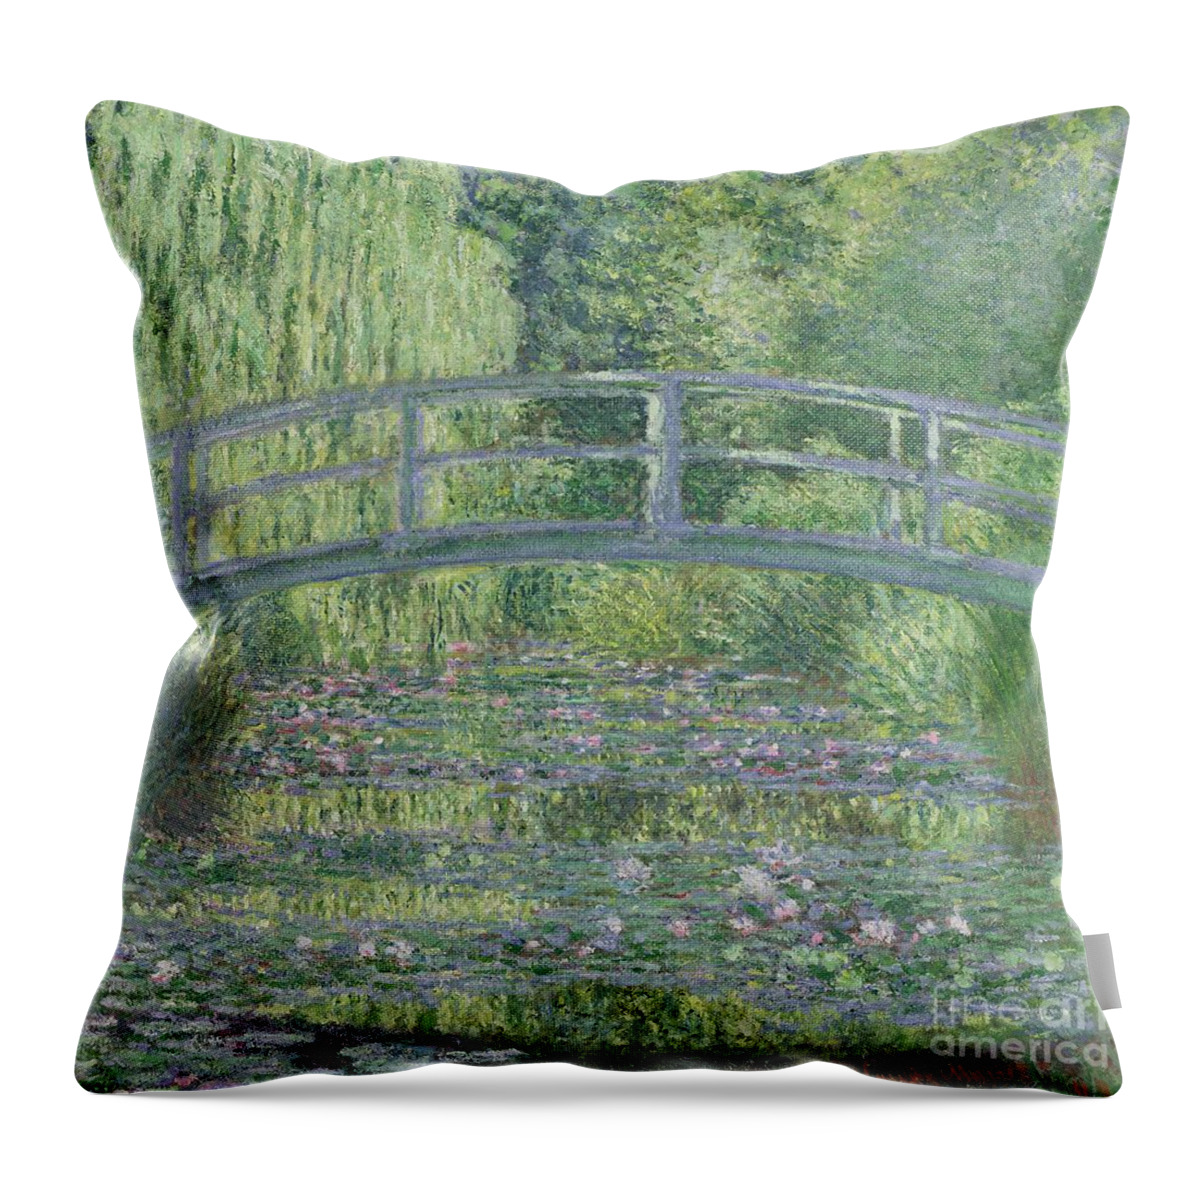 The Throw Pillow featuring the painting The Waterlily Pond by Claude Monet